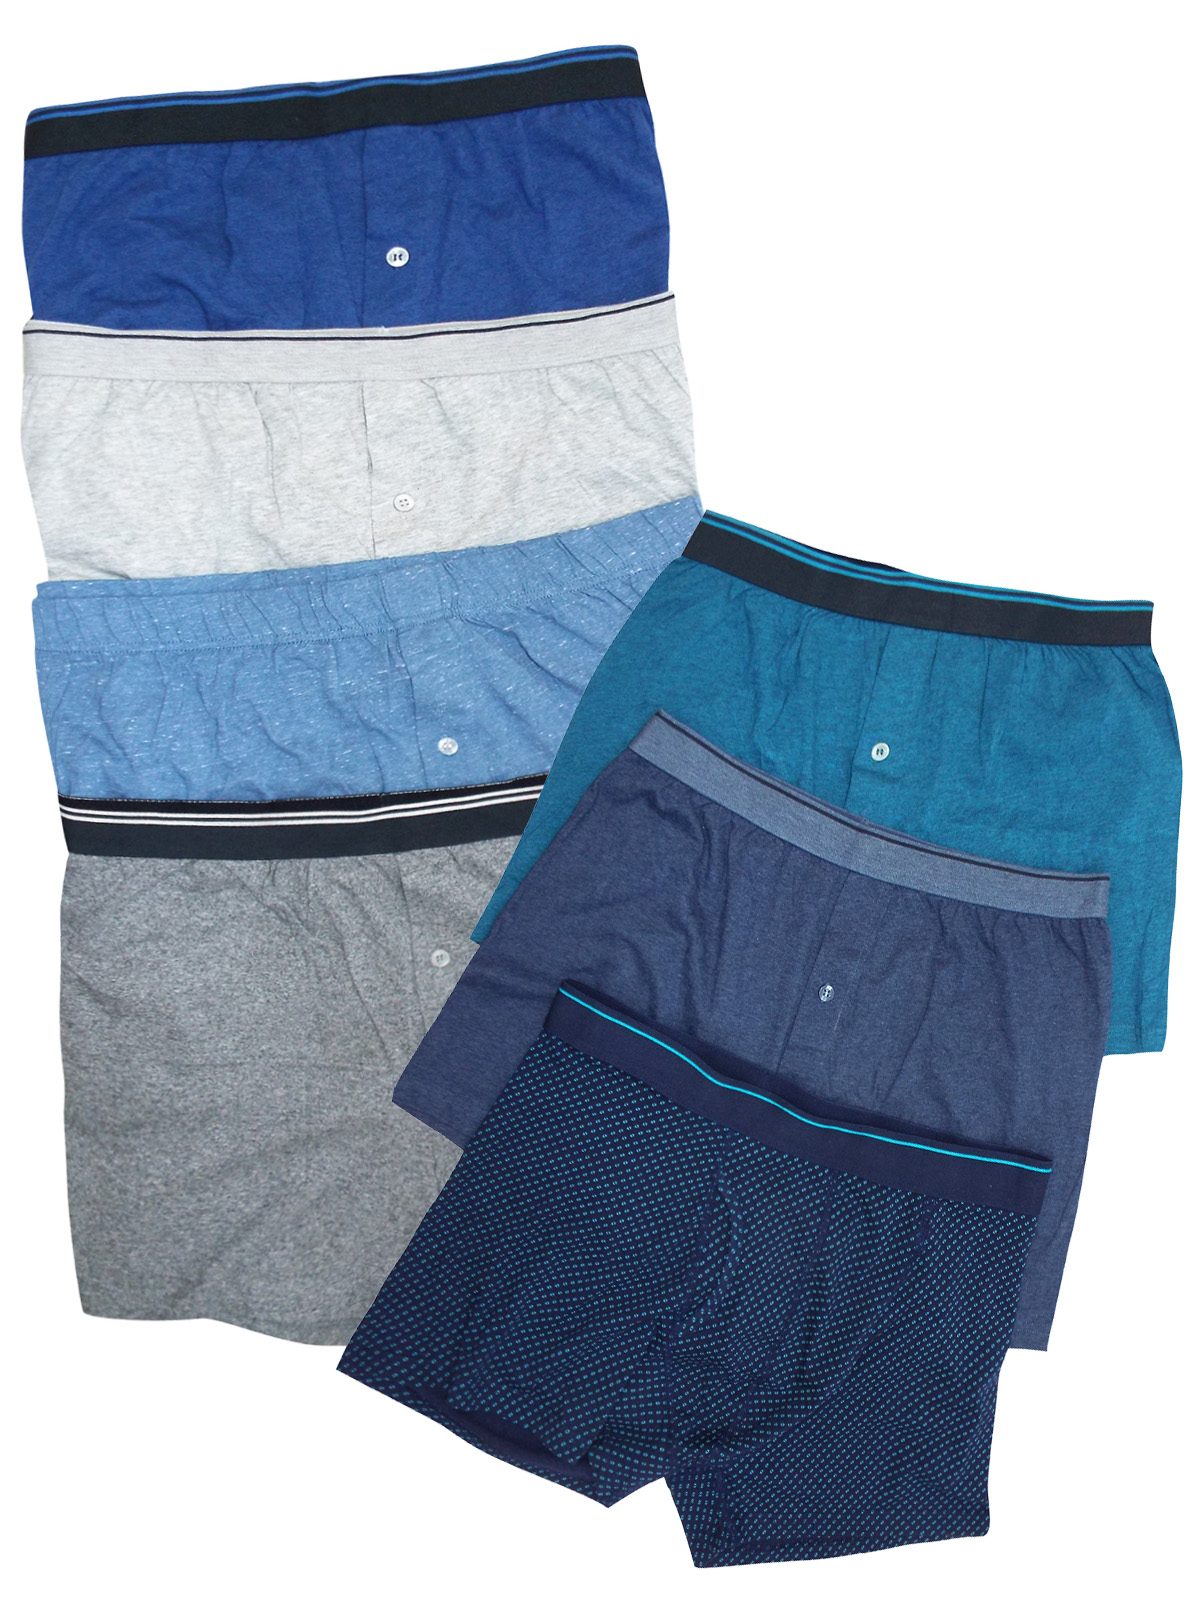 F&F - - F&F ASSORTED Mens Pure Cotton Boxers - Size M to 2XL